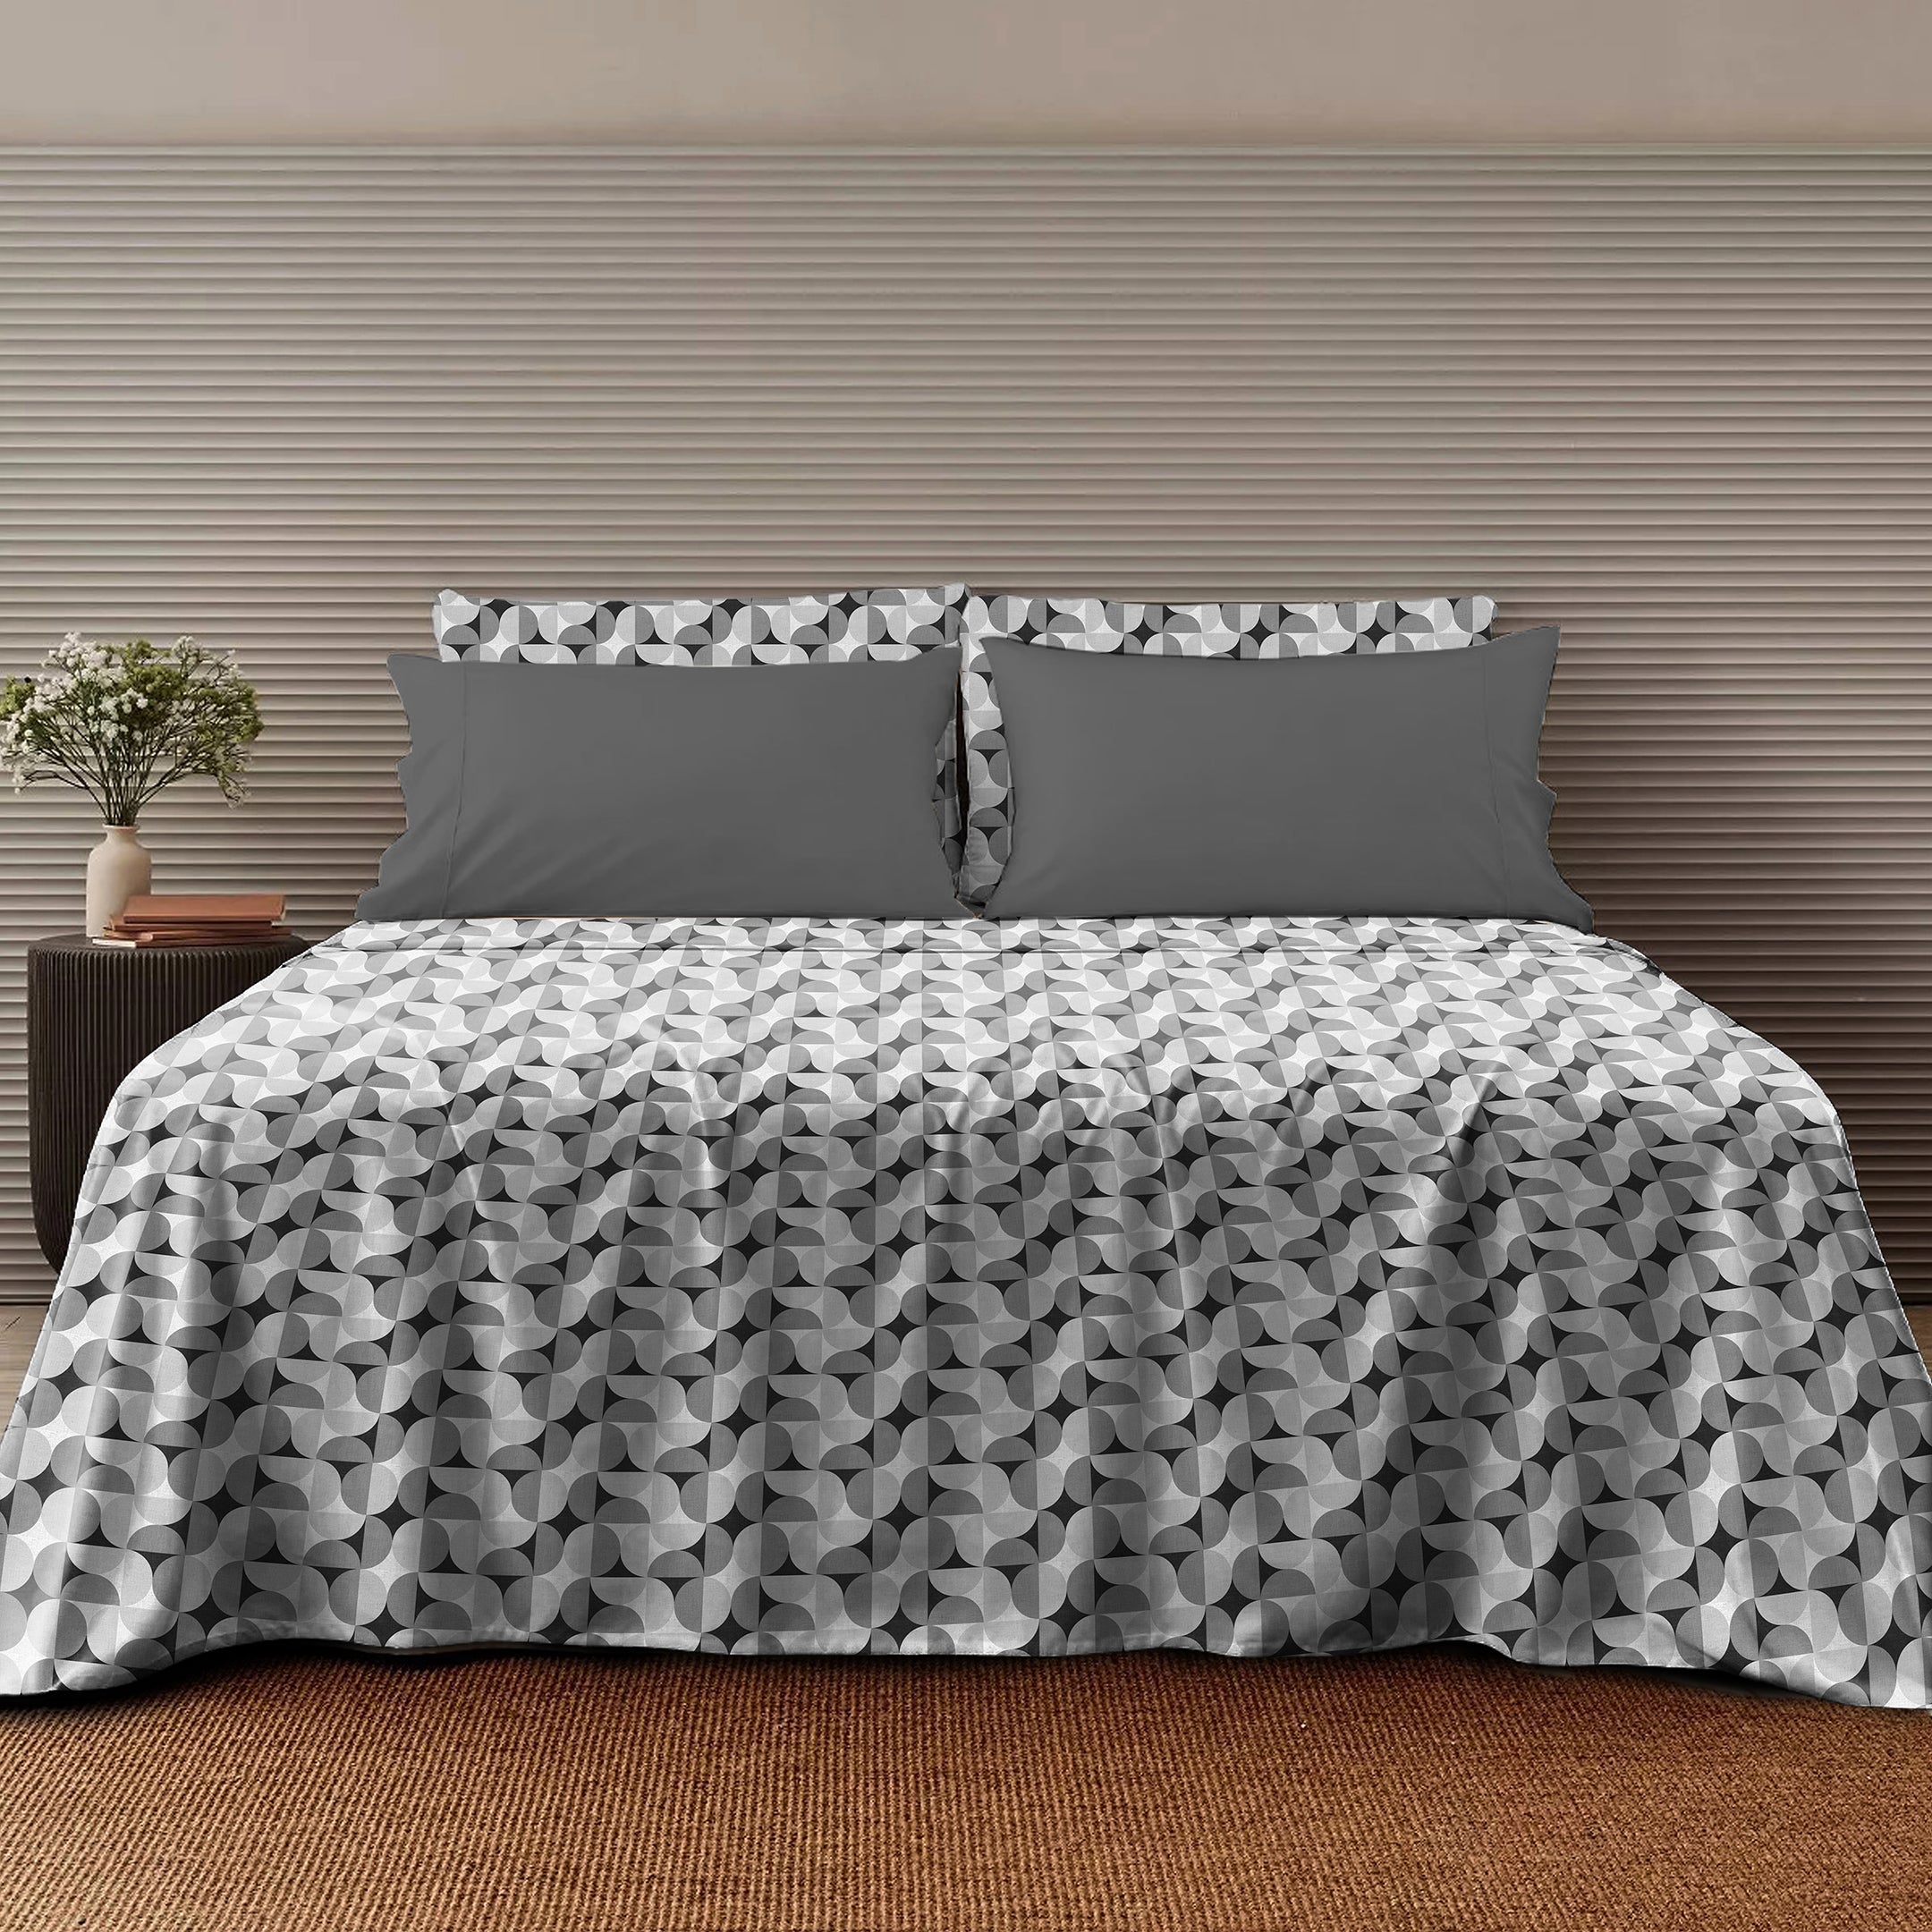 illusion Circle Bedsheet for Double Bed with 2 PillowCovers King Size (104" X 90") Black/Gray